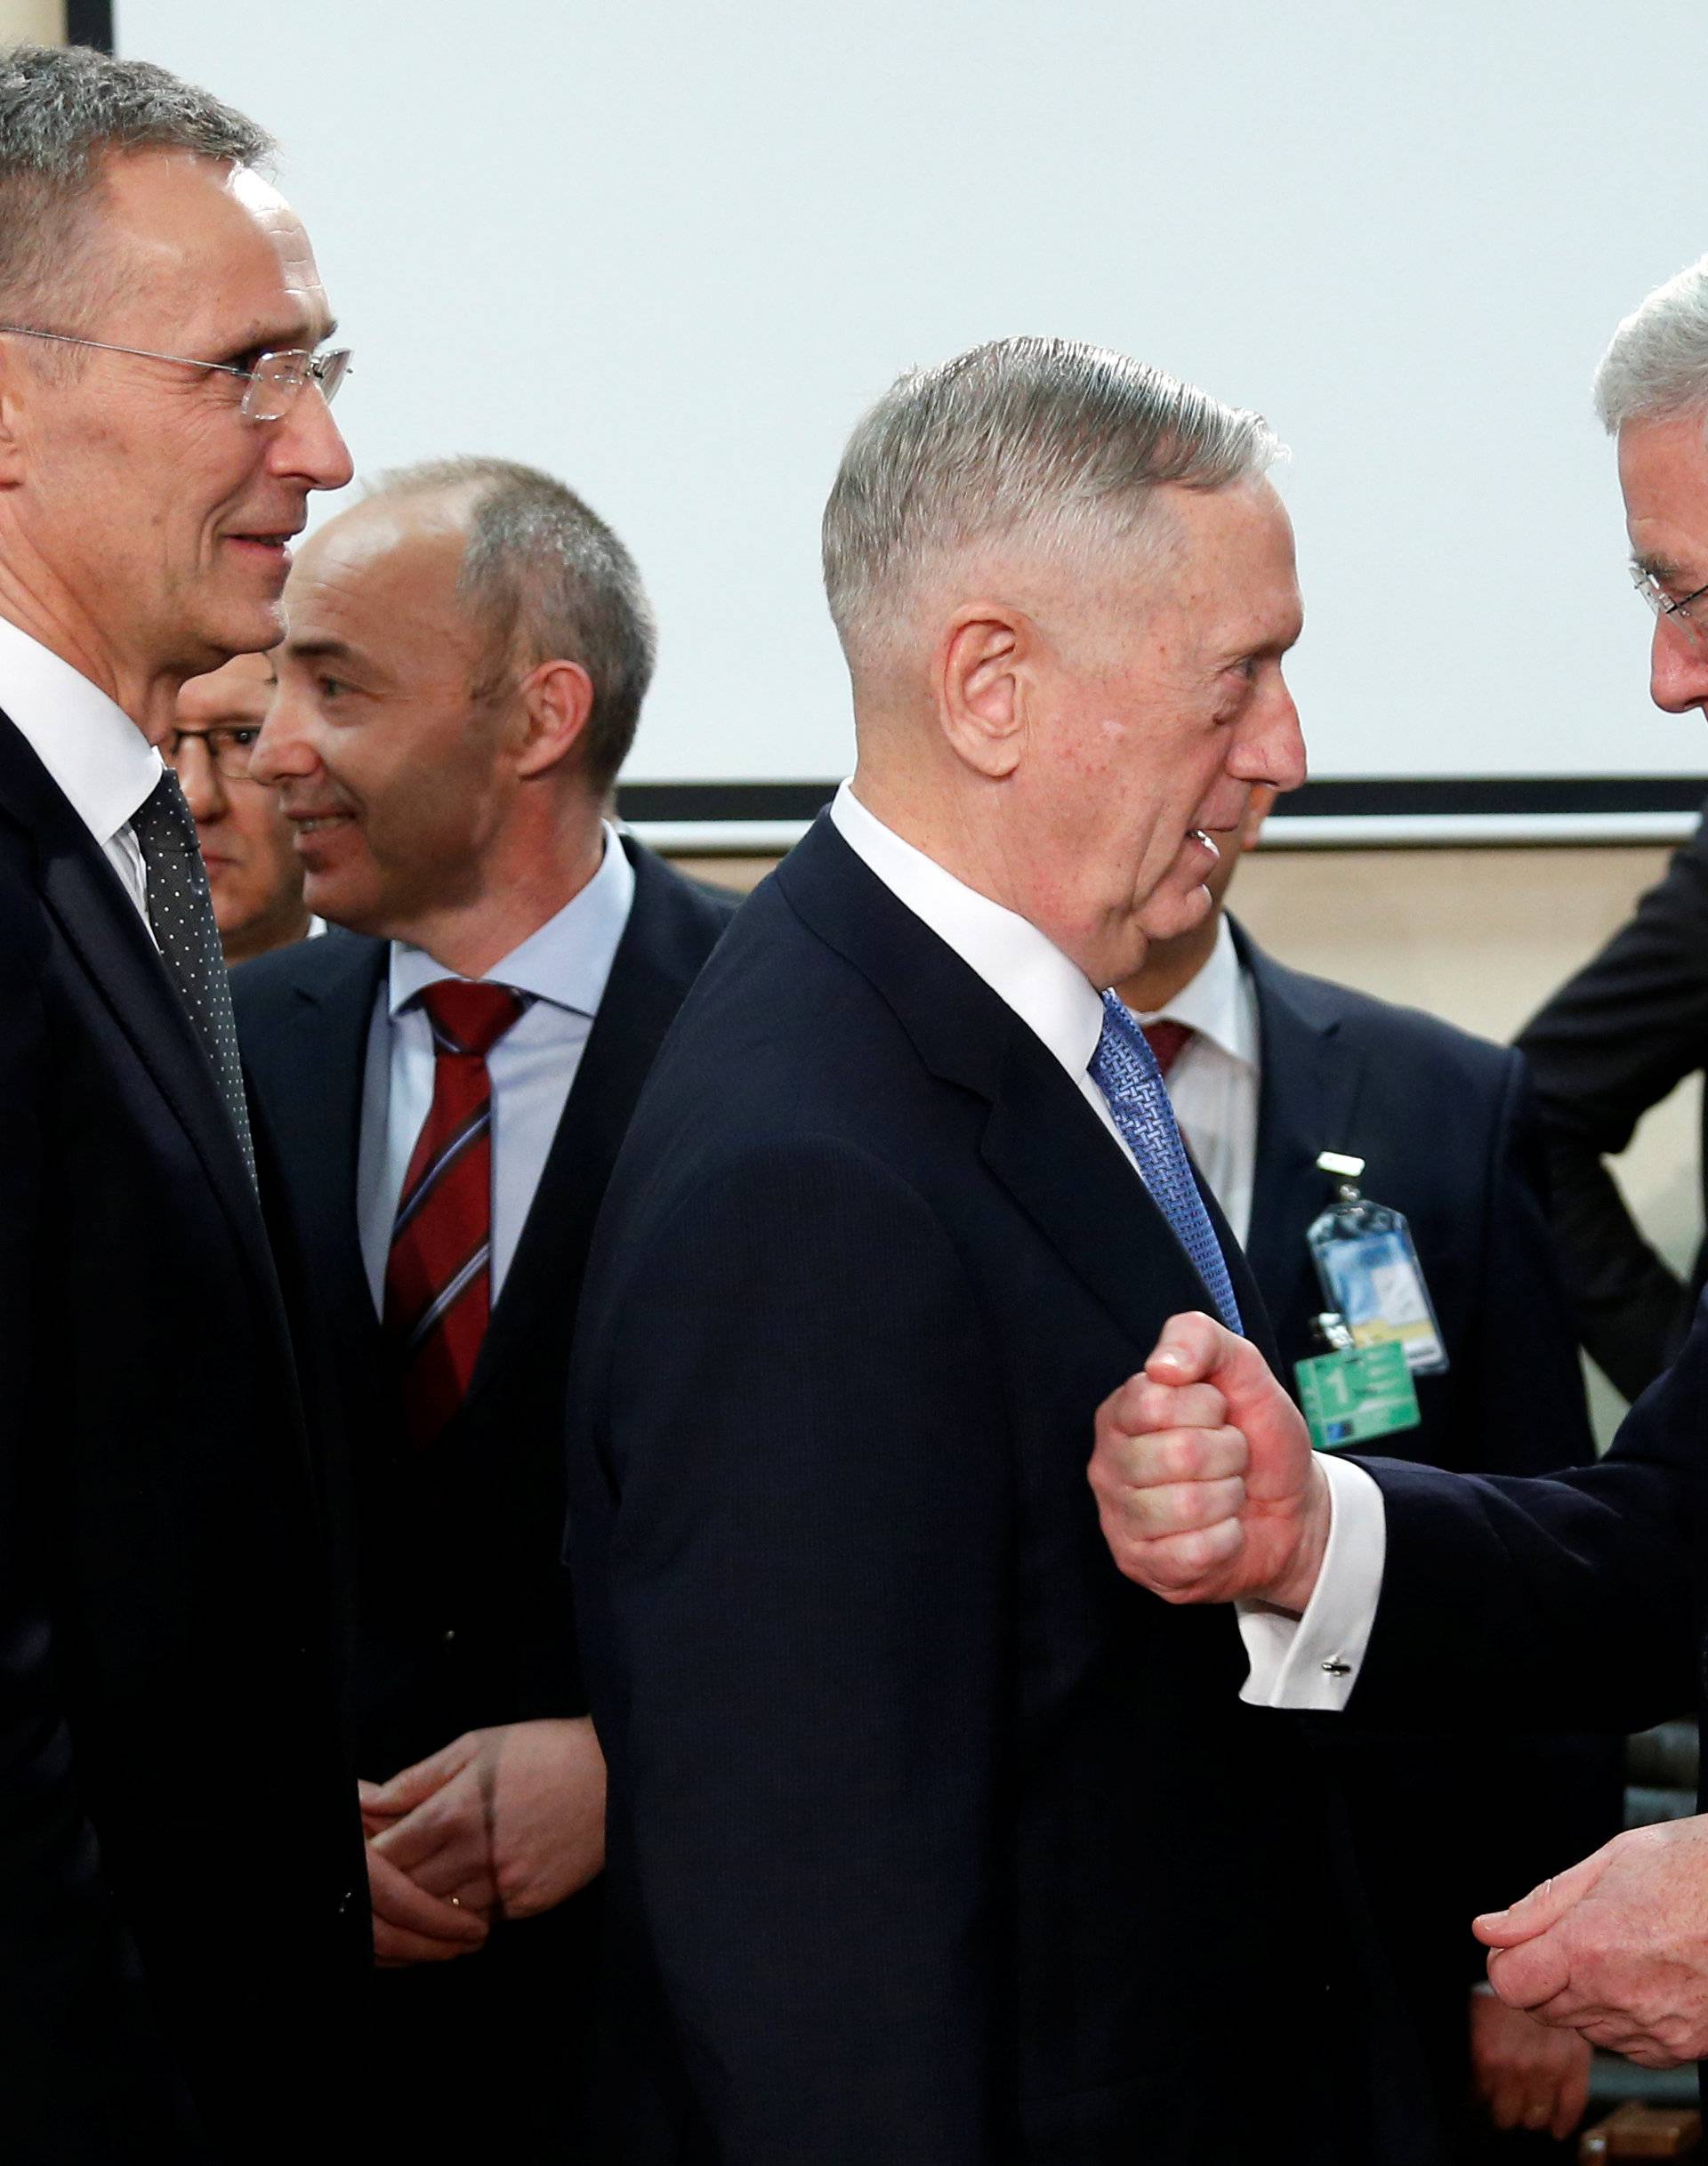 NATO Secretary-General Stoltenberg, U.S. Defense Secretary Mattis and British Defence Secretary Fallon attend a NATO defence ministers meeting in Brussels